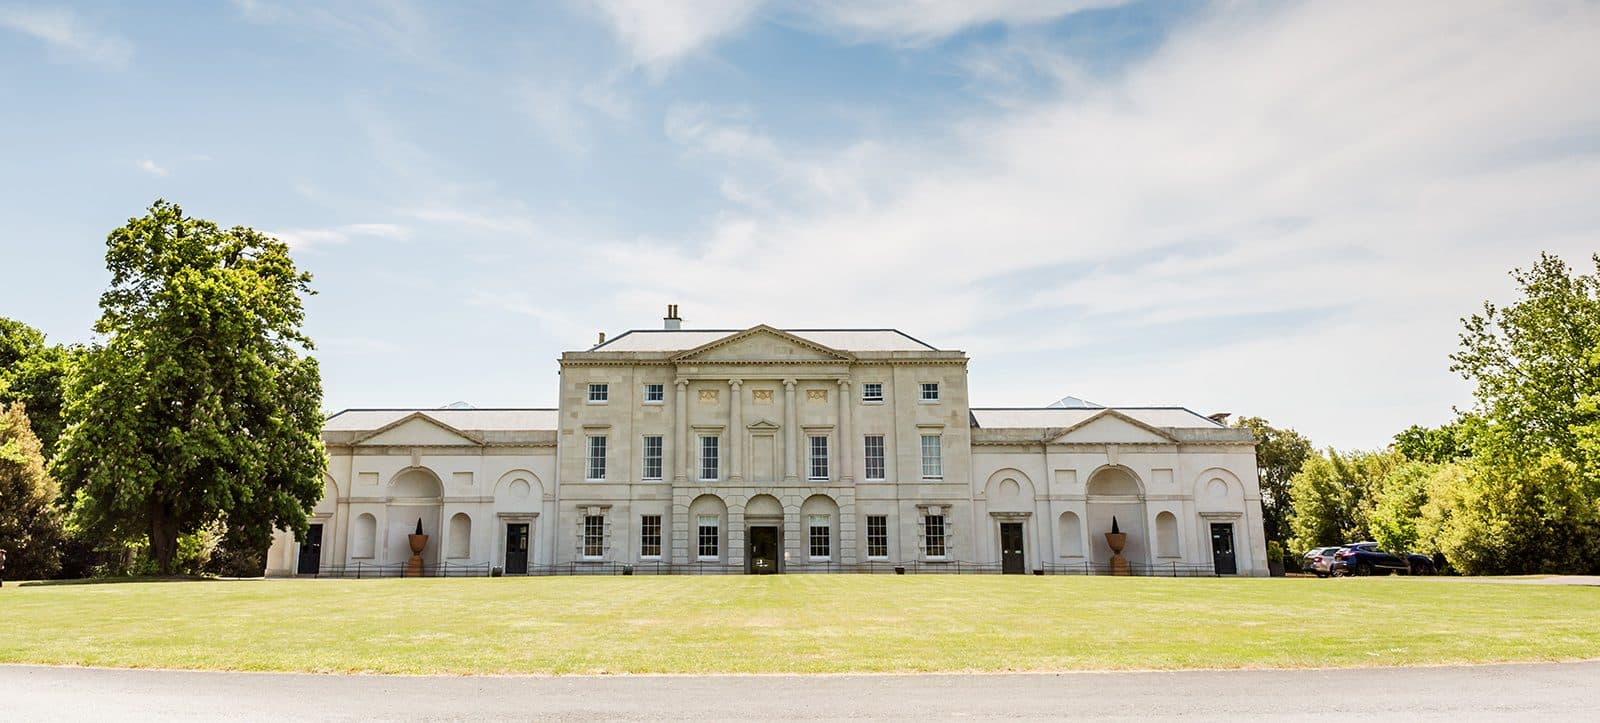 The front view of Cams Hall with driveway and lawn on a summers day.